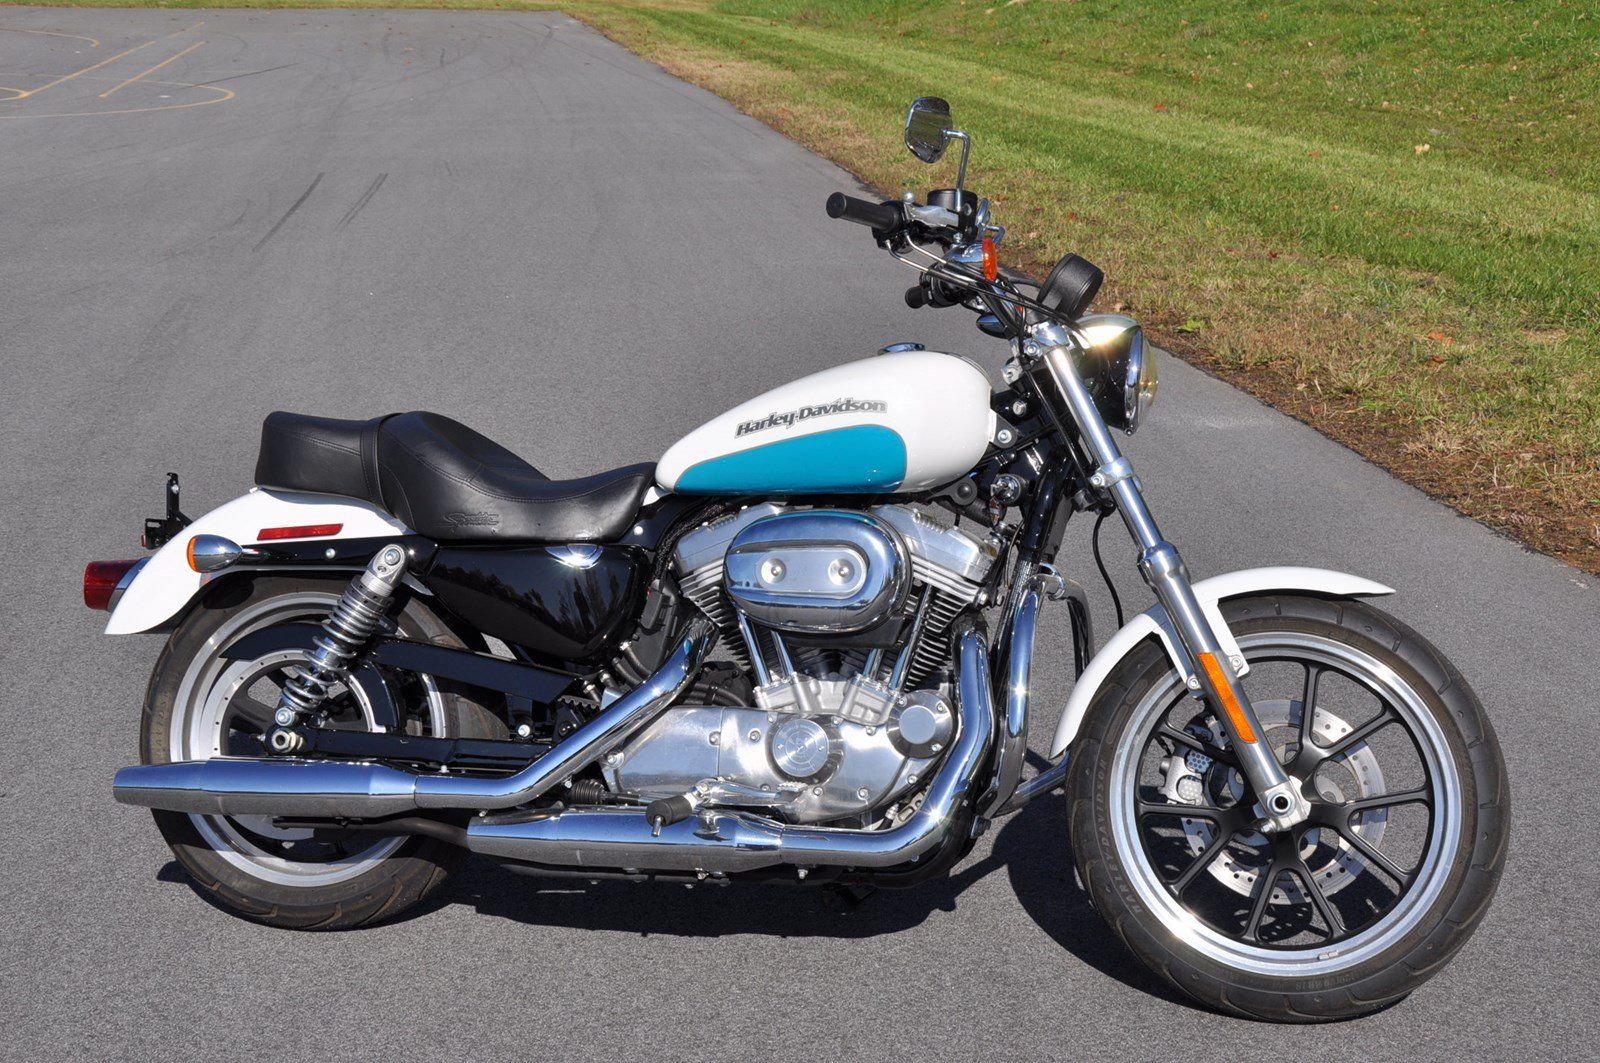 Harley Davidson Sportster SuperLow white and blue